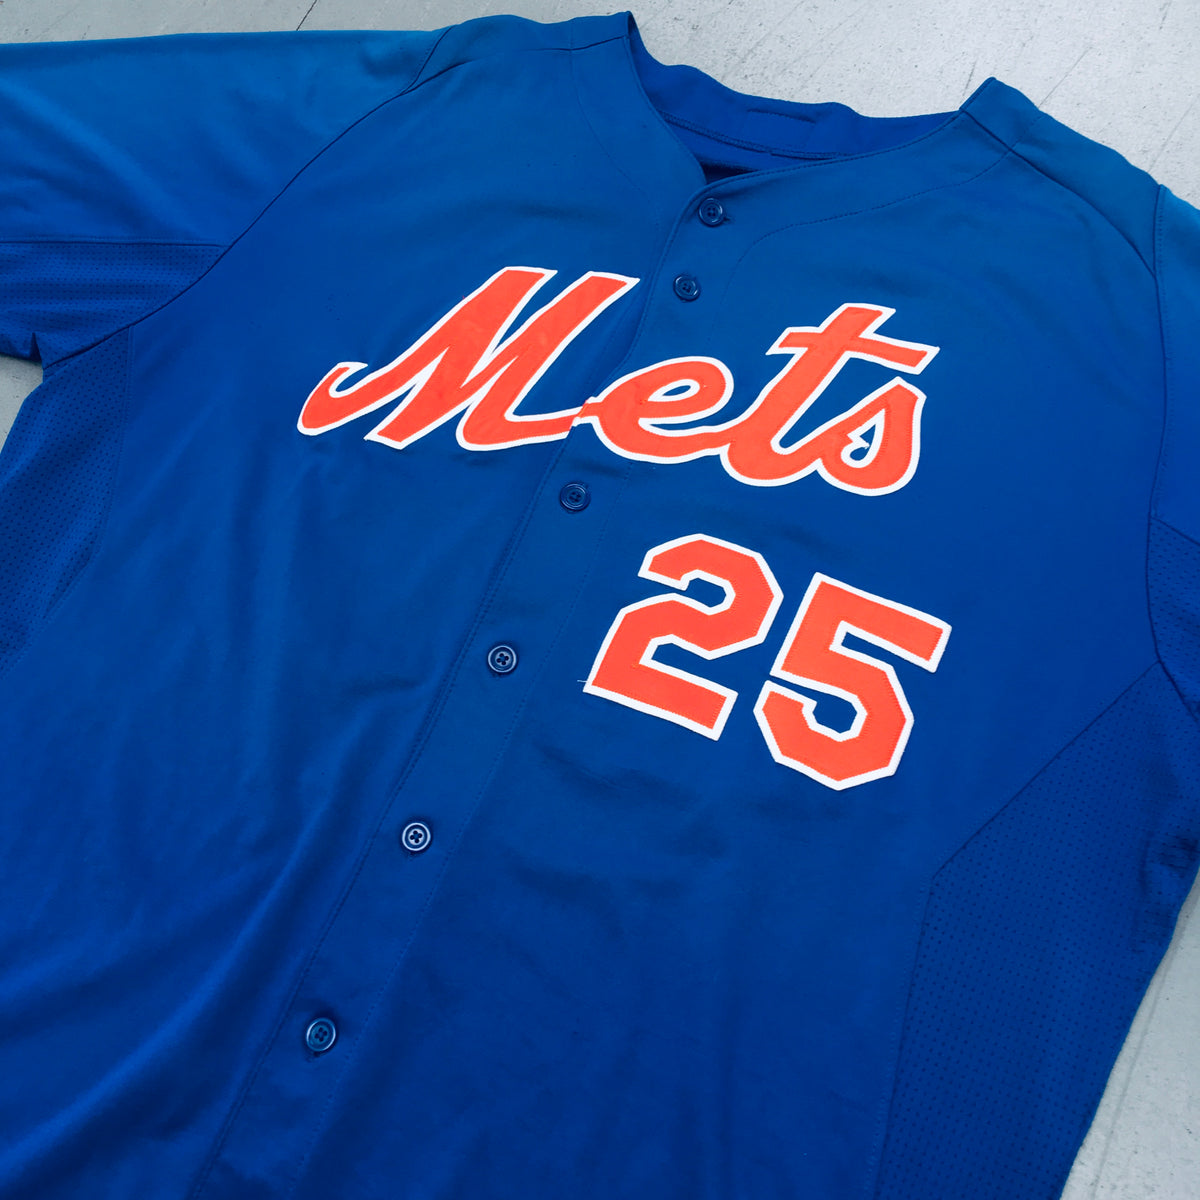 MIKE PIAZZA New York Mets 2004 Majestic Authentic Throwback